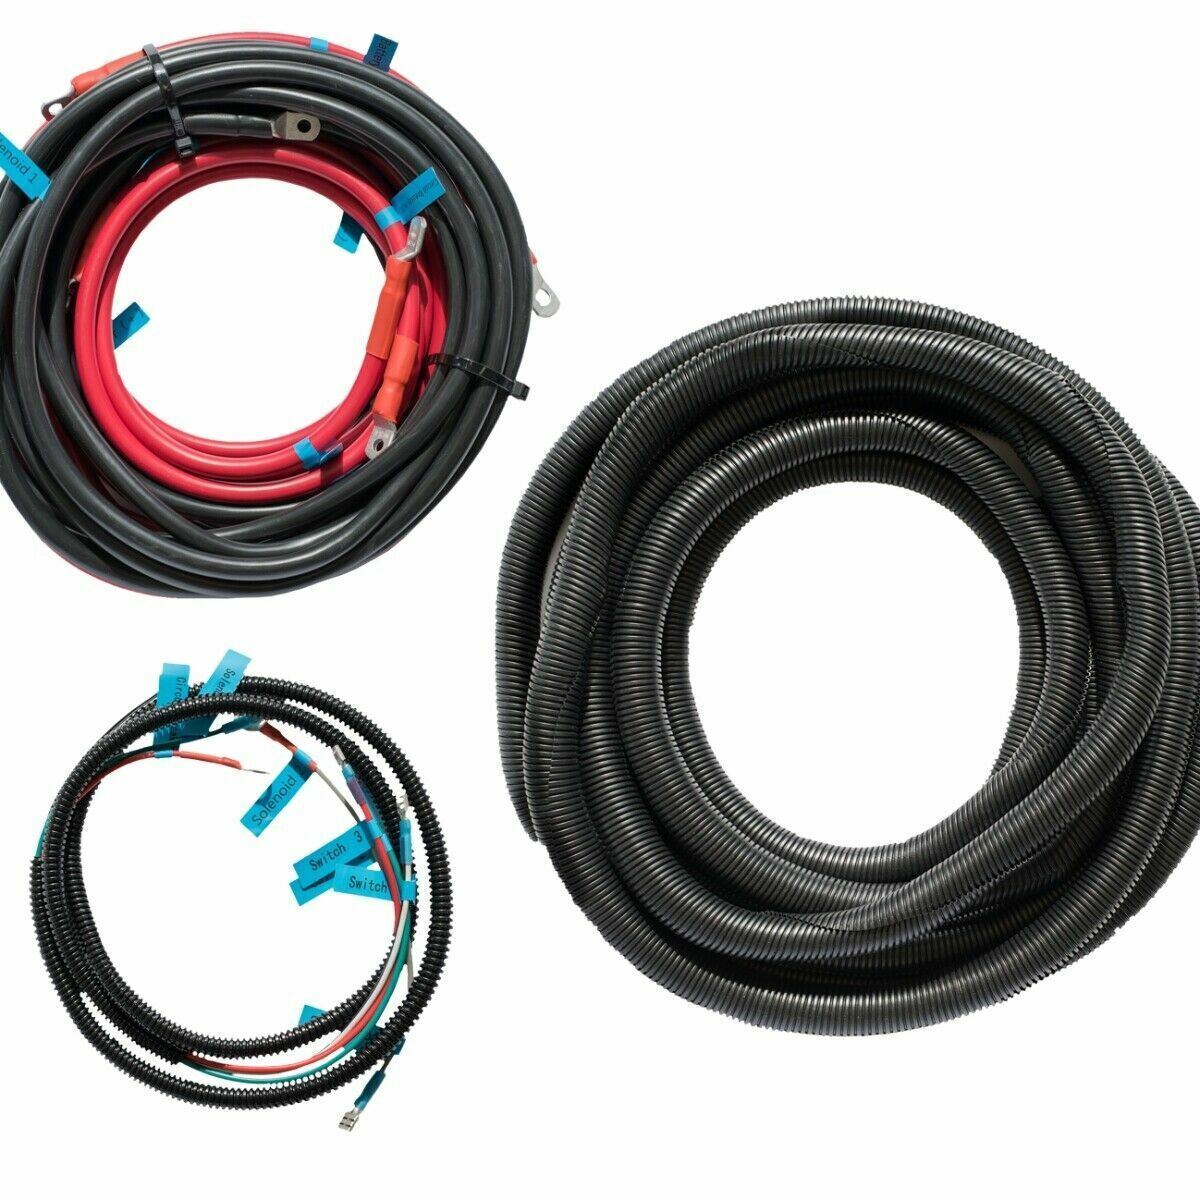 BELL MARINE VIPER PRO MARINE ANCHOR WINCH WIRING LOOM TO SUIT BOATS UP TO 8.0Mtr